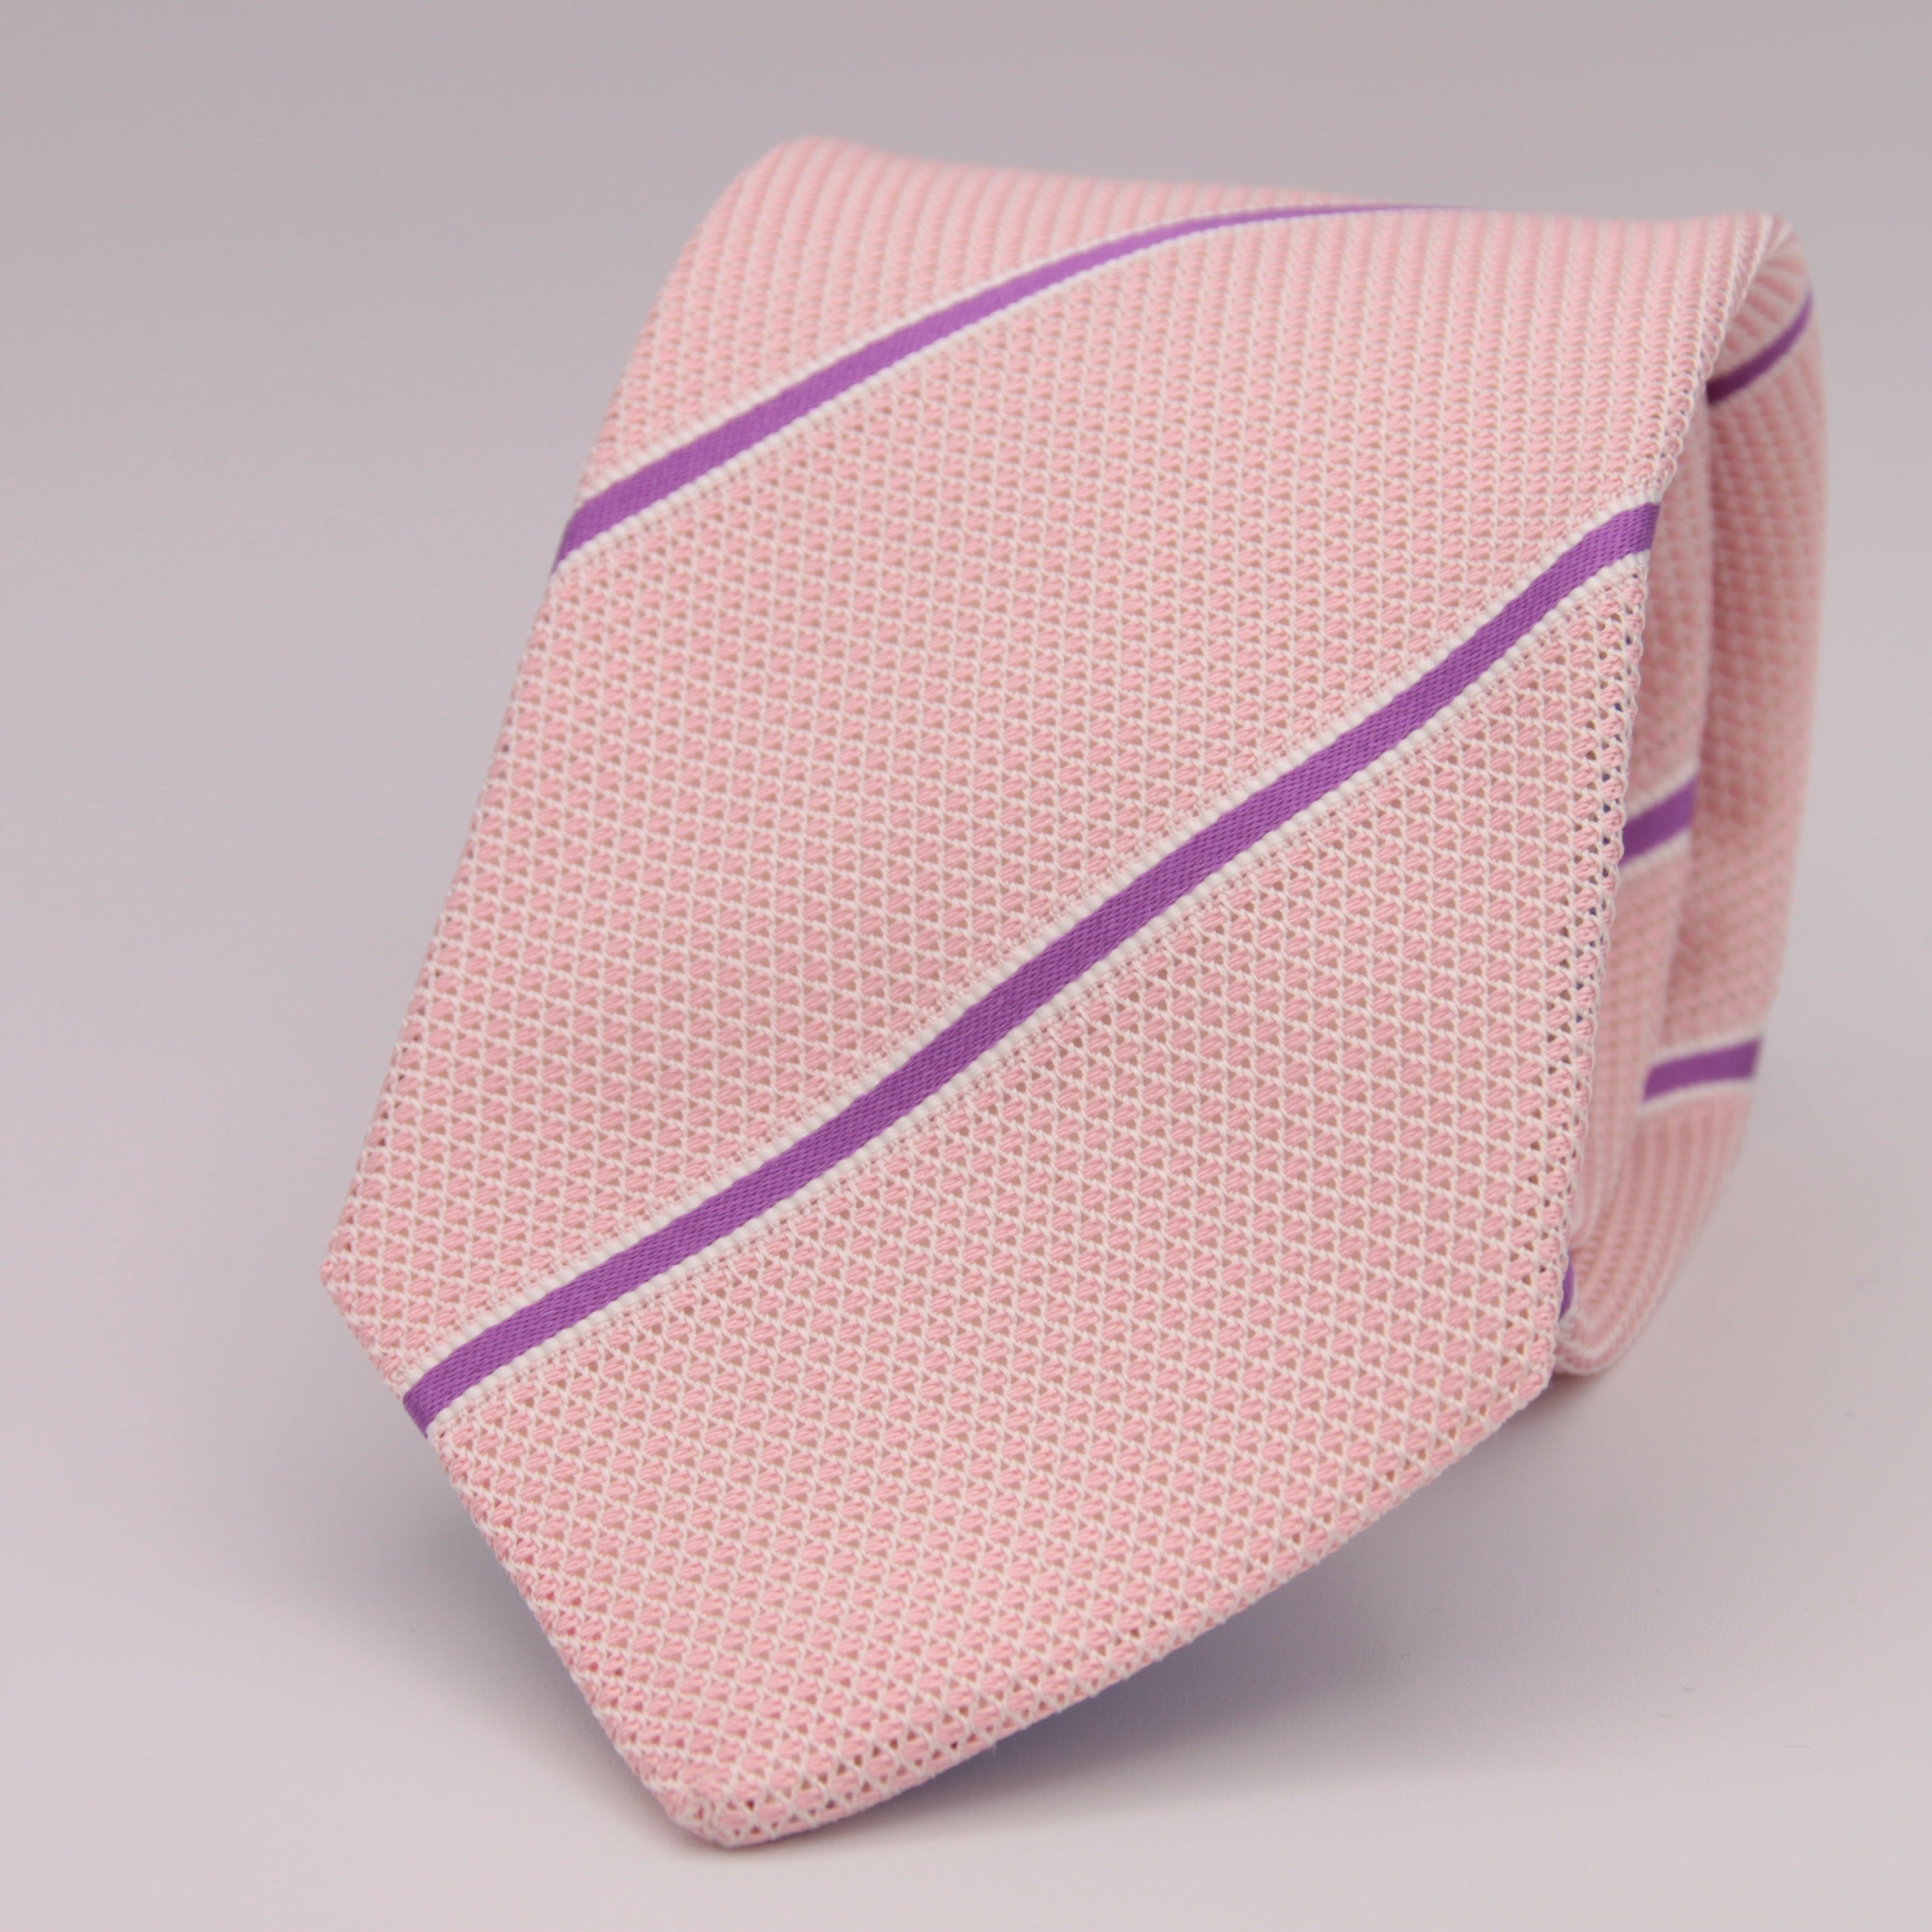 Drake's Archive 100% Silk Garza Piccola Tipped  Light Pink, Purple and White Stripes  Tie Handmade in England 9,5 cm x 146 cm #5322